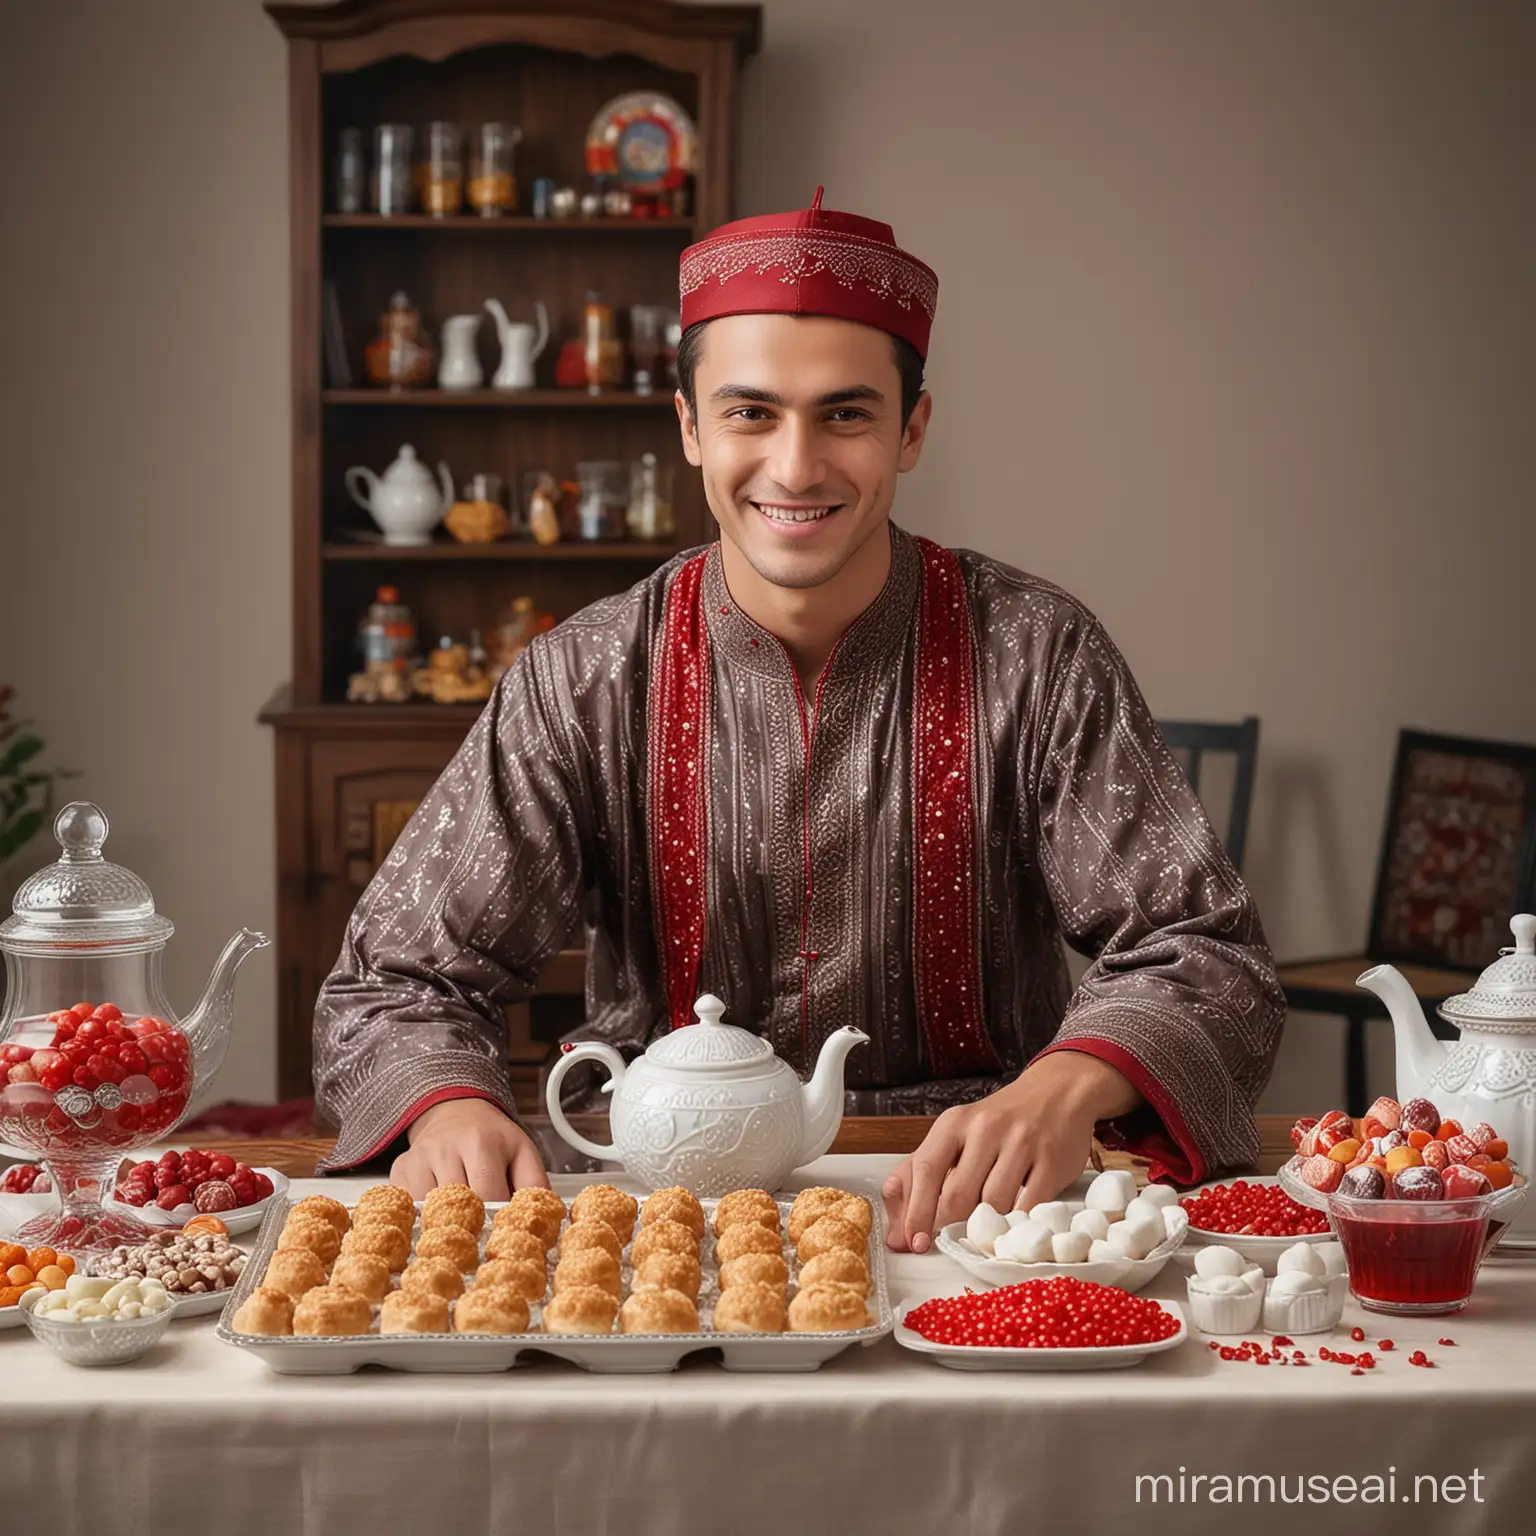 Real photo of an elegant and smiling Western young man celebrating Eid al-Fitr. In front of him is a table with a variety of sweets and a teapot. He wears a traditional robe that is half white and half red. Behind him is the name “Karim” written in red crystal, and in front of him are the words “Eid Mubarak.” Realistic, high-quality 4K image